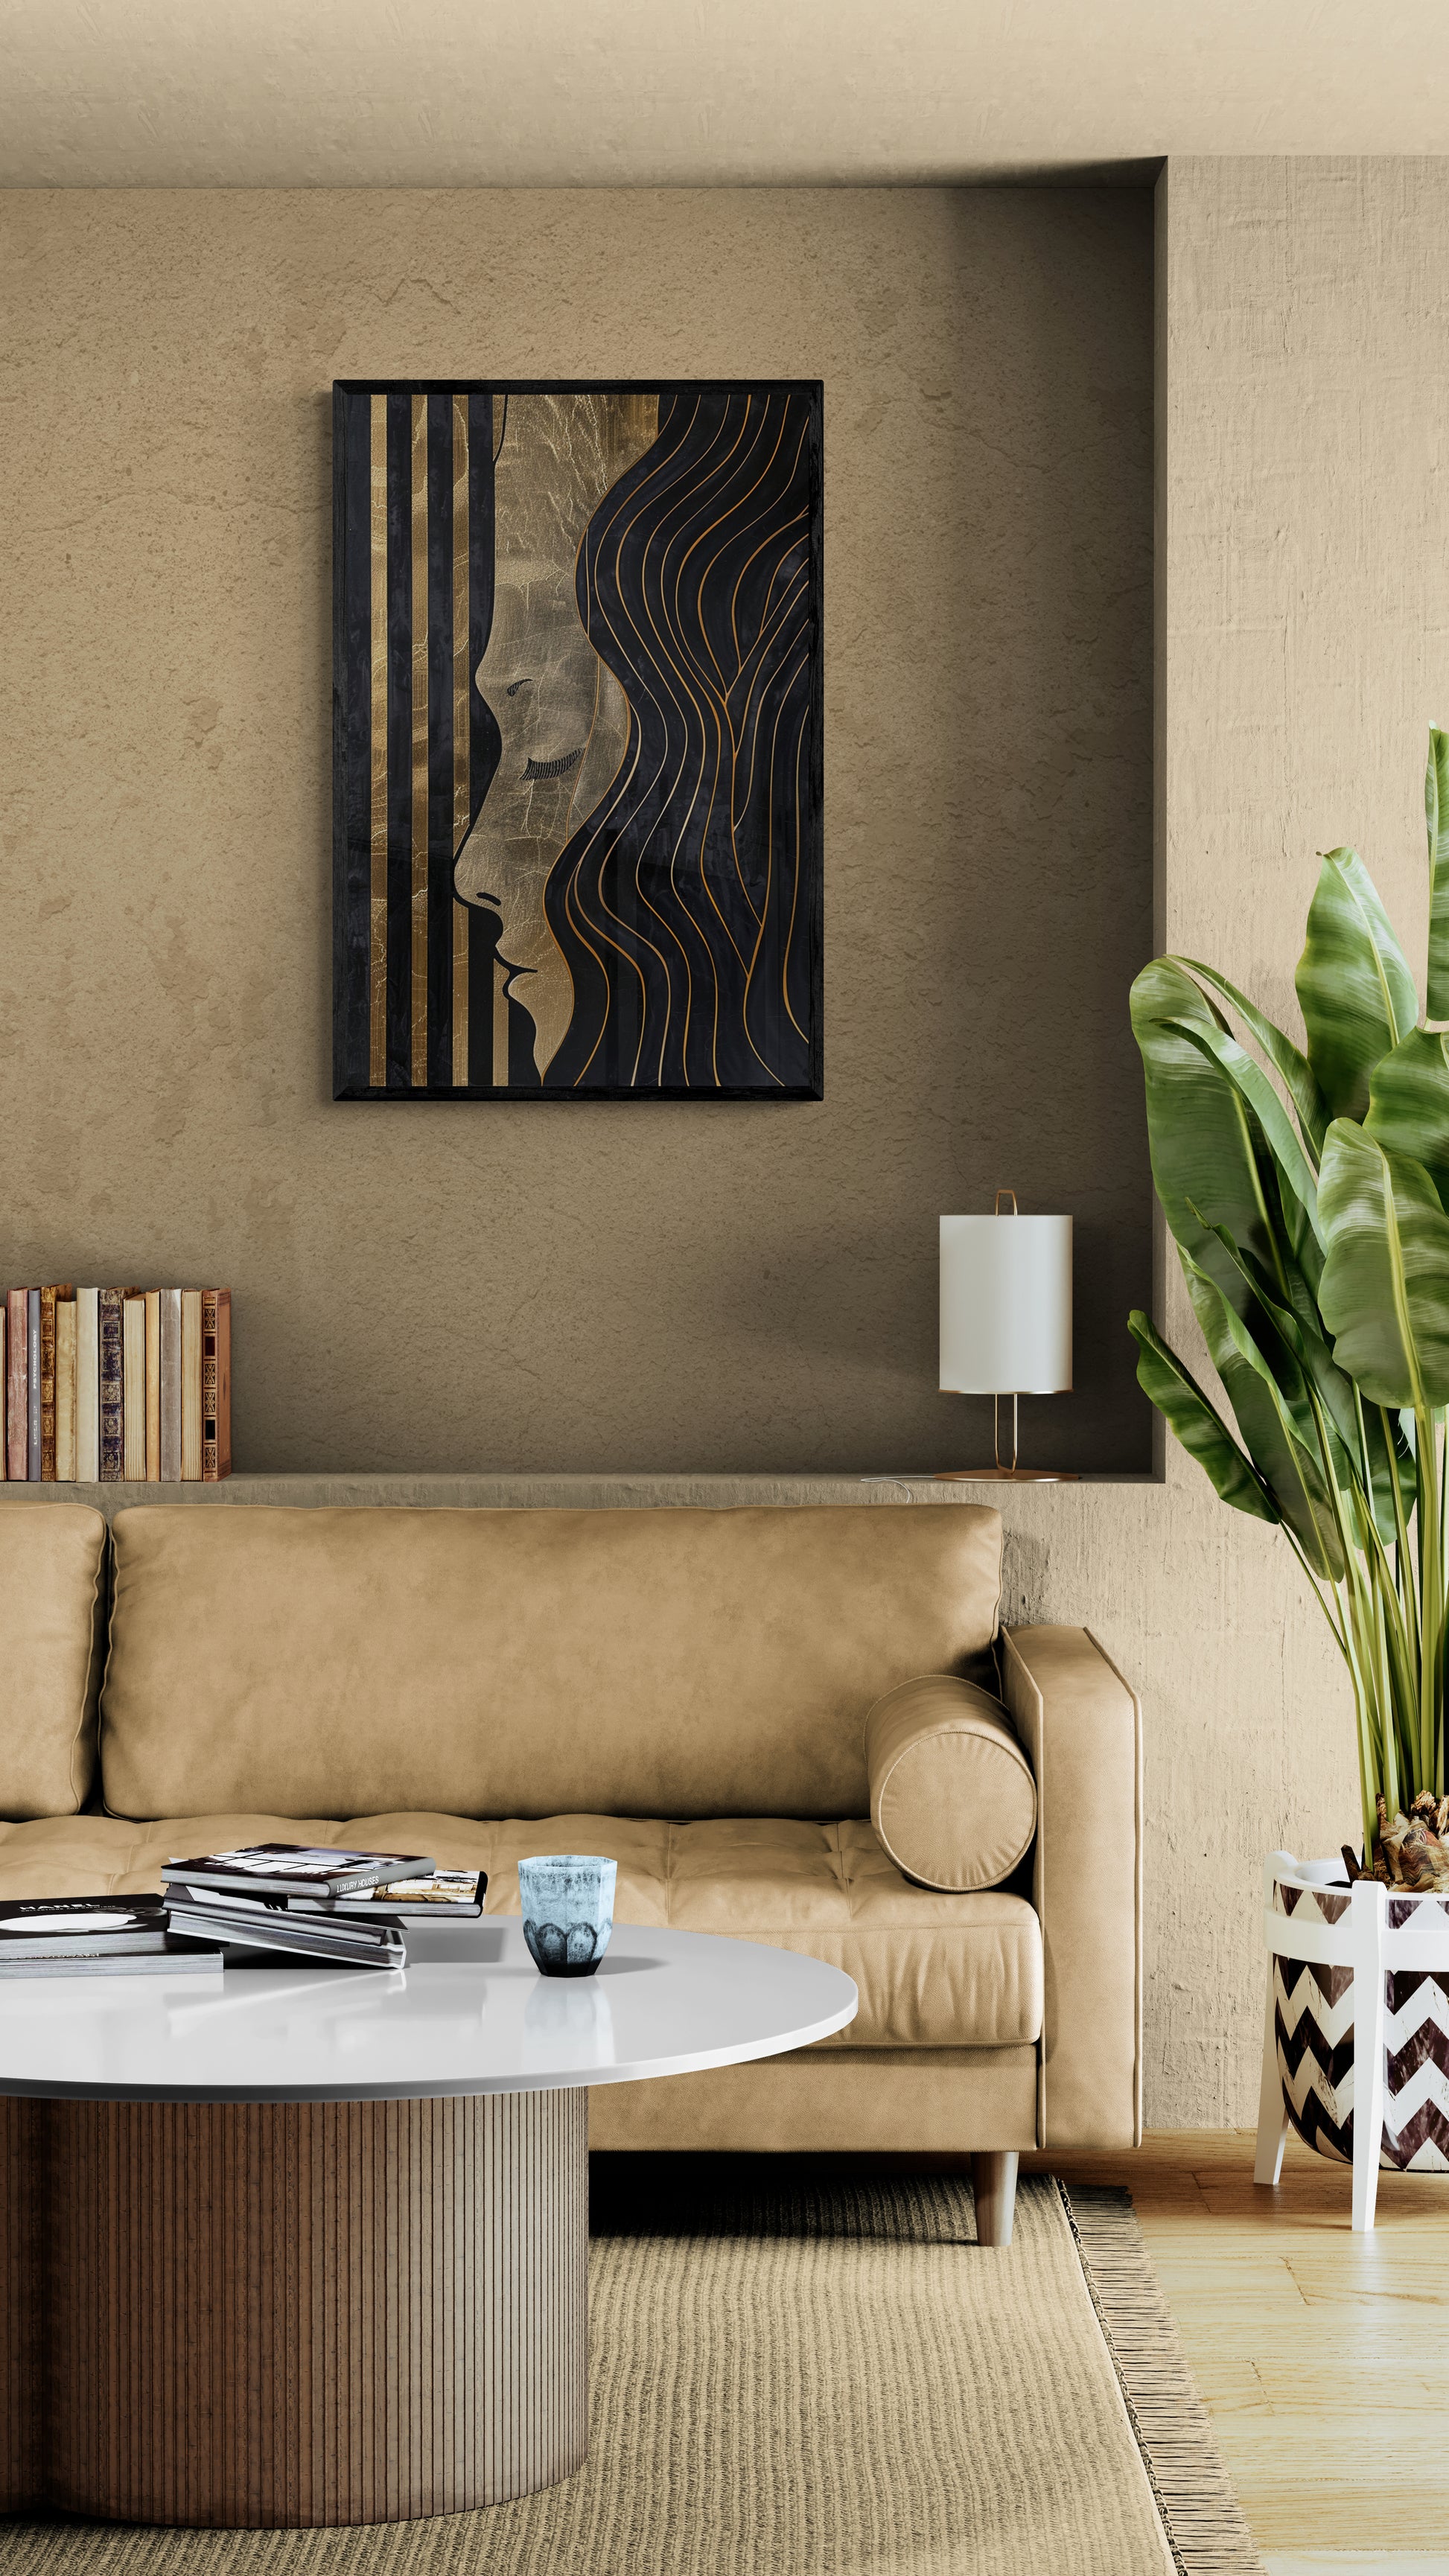 Elegant living room featuring a framed canvas art piece from Milton Wes Art, displaying abstract faces in gold and black, complemented by a beige sofa, round coffee table, and lush green plants.